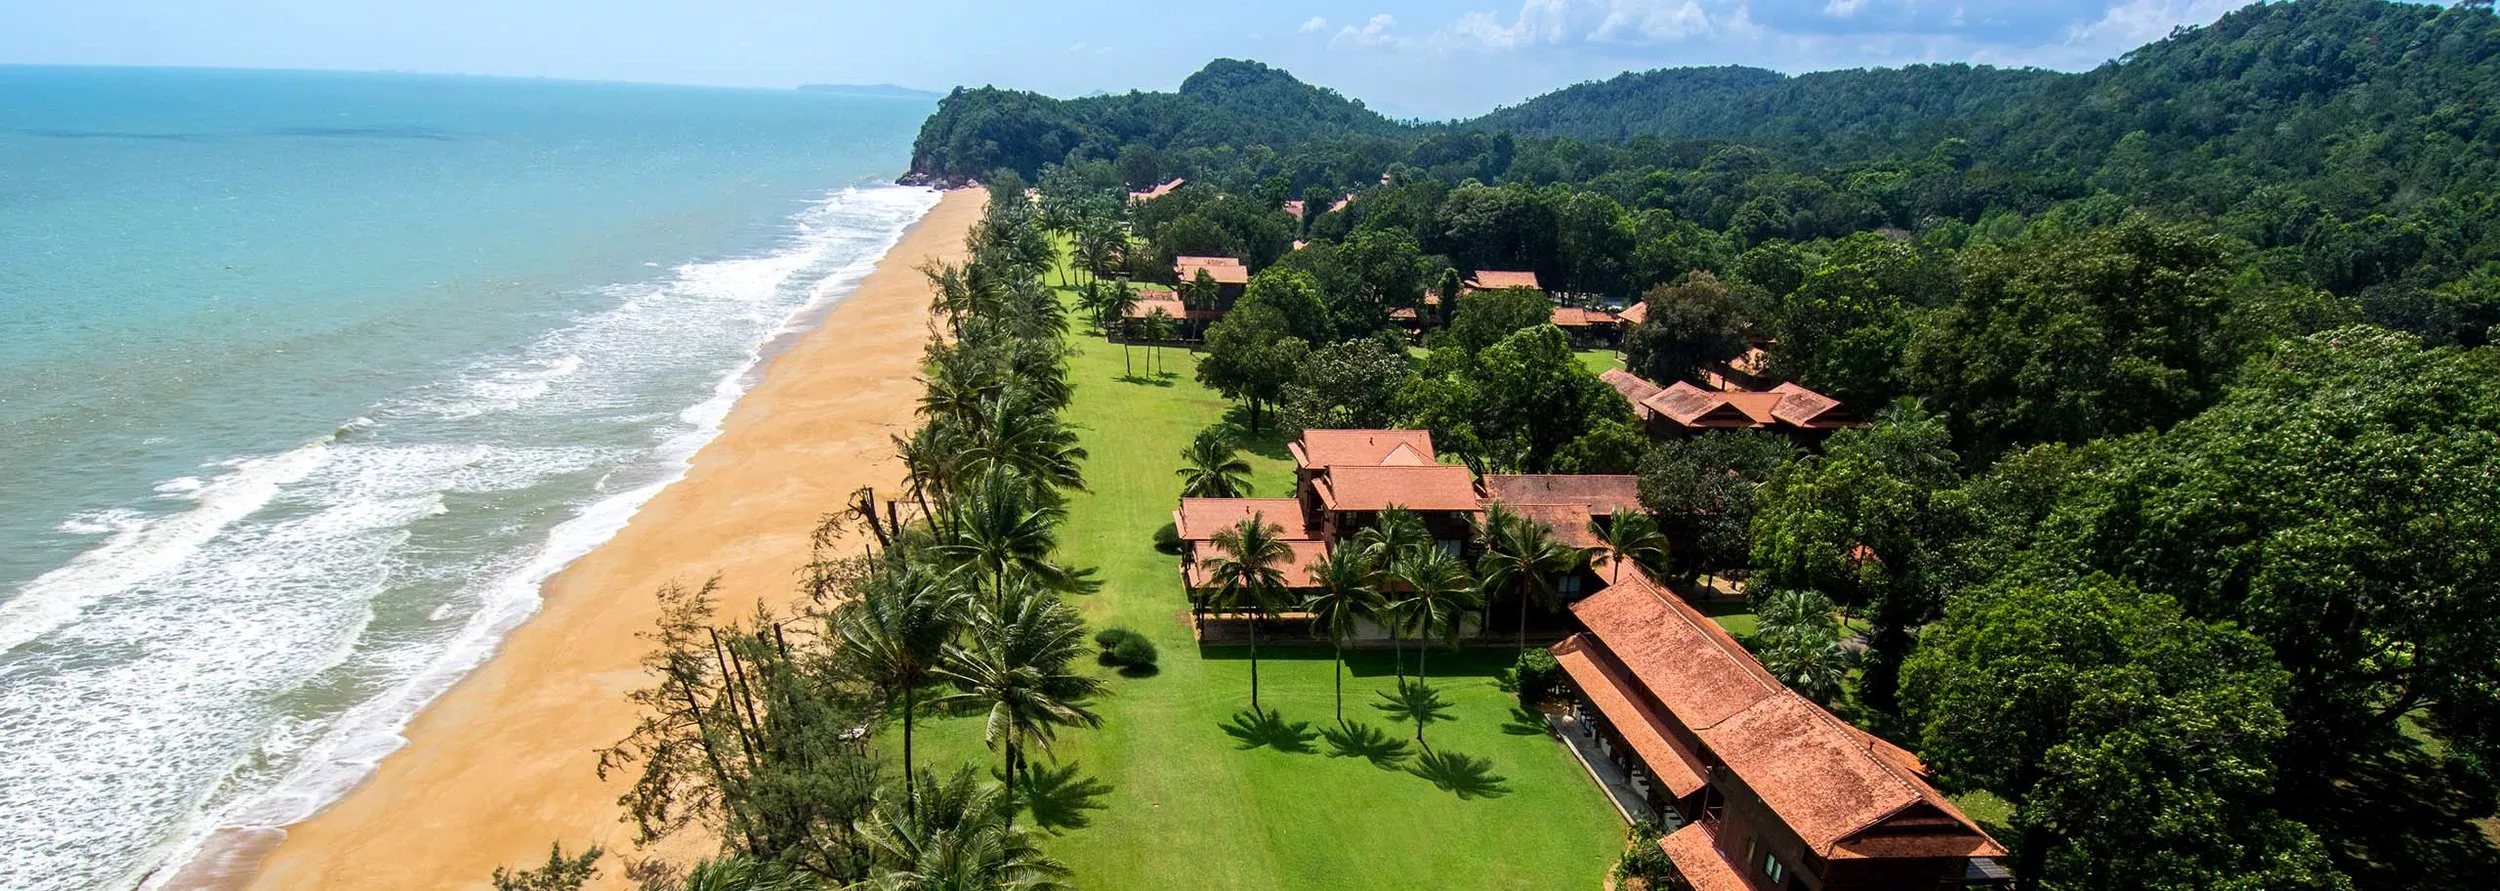 Cherating Beach in Malaysia, East Asia | Surfing,Beaches - Rated 0.7